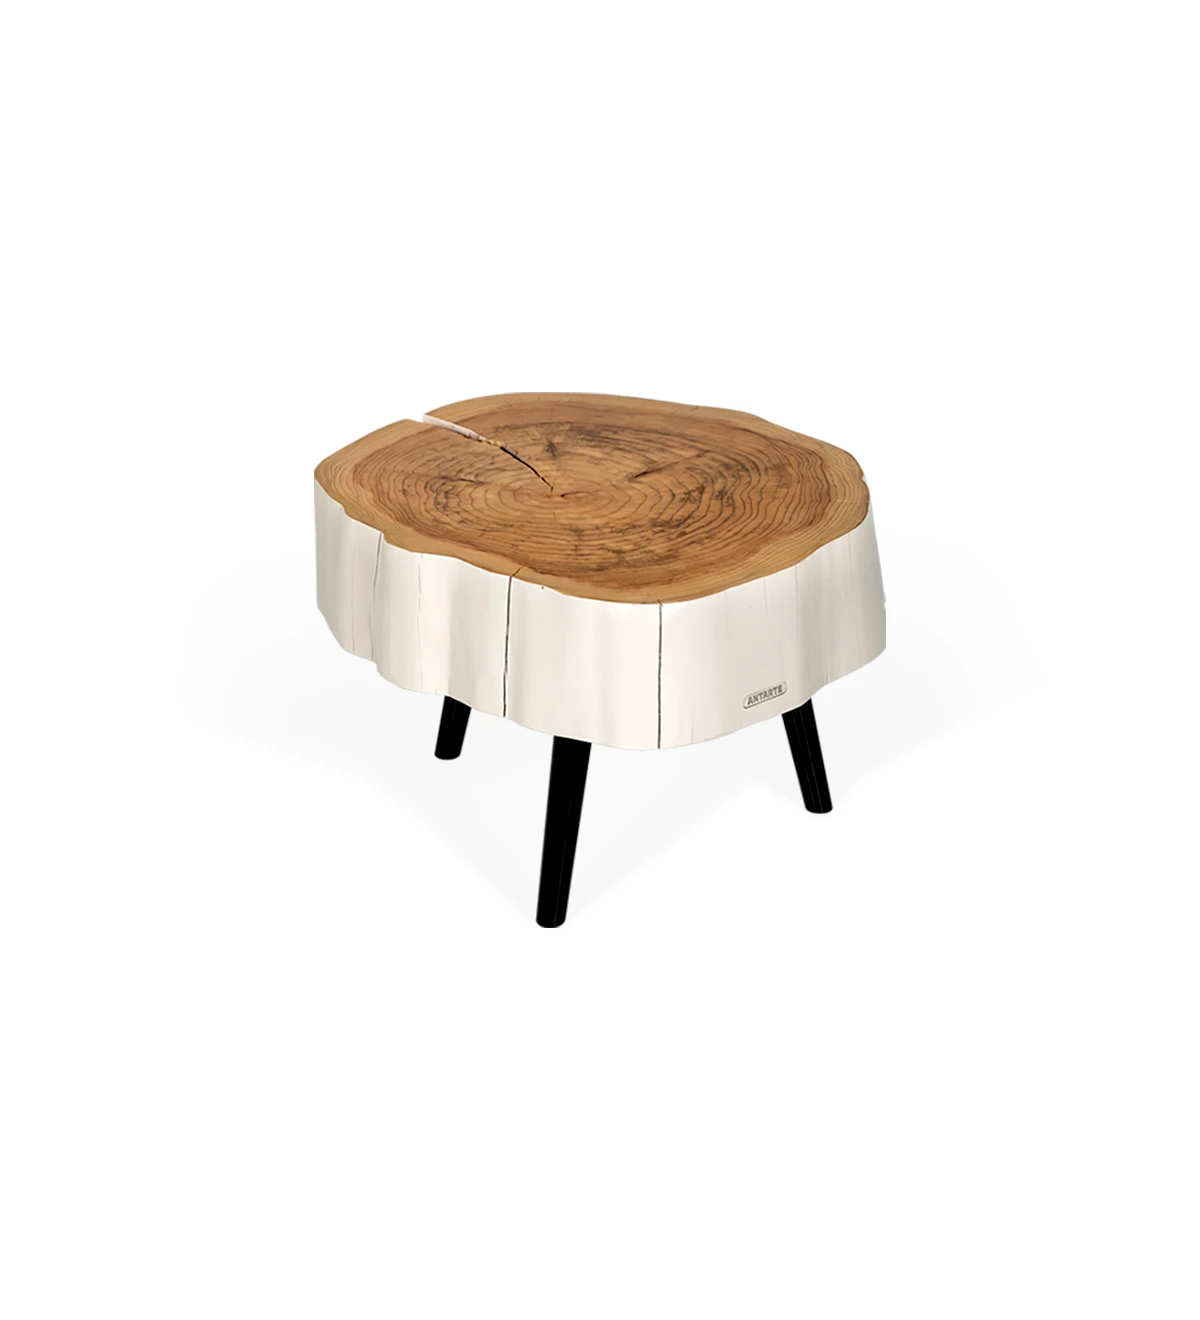 Trunk center table in natural cryptomeria wood lacquered in pearl, black lacquered feet, Ø 60 to 75 cm.